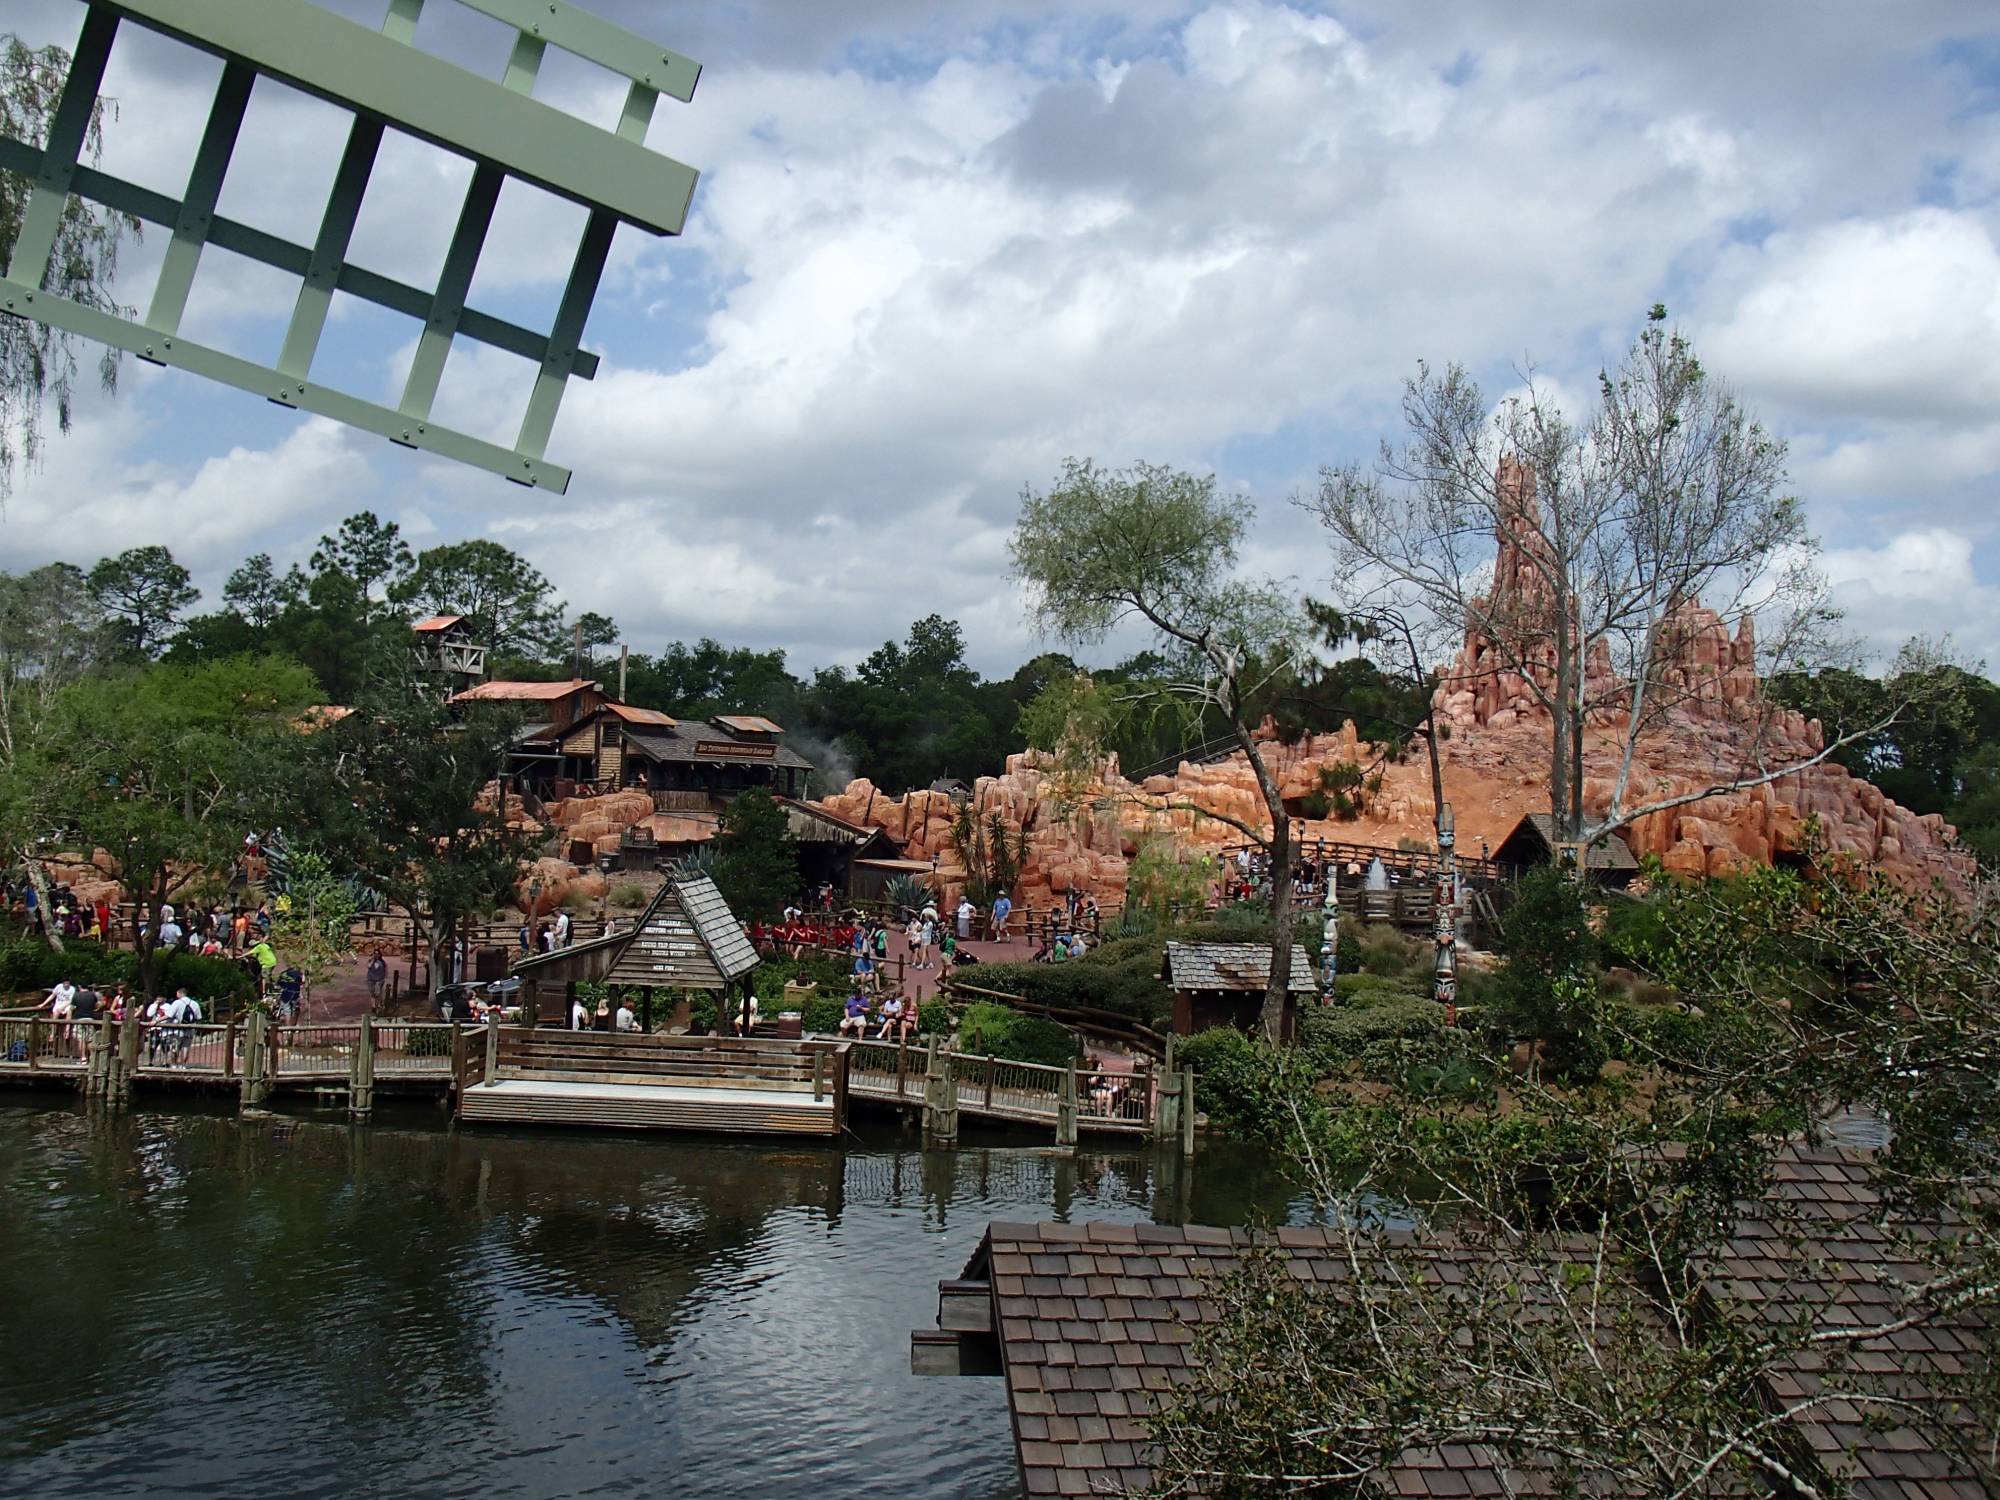 The View from Tom Sawyer's Island